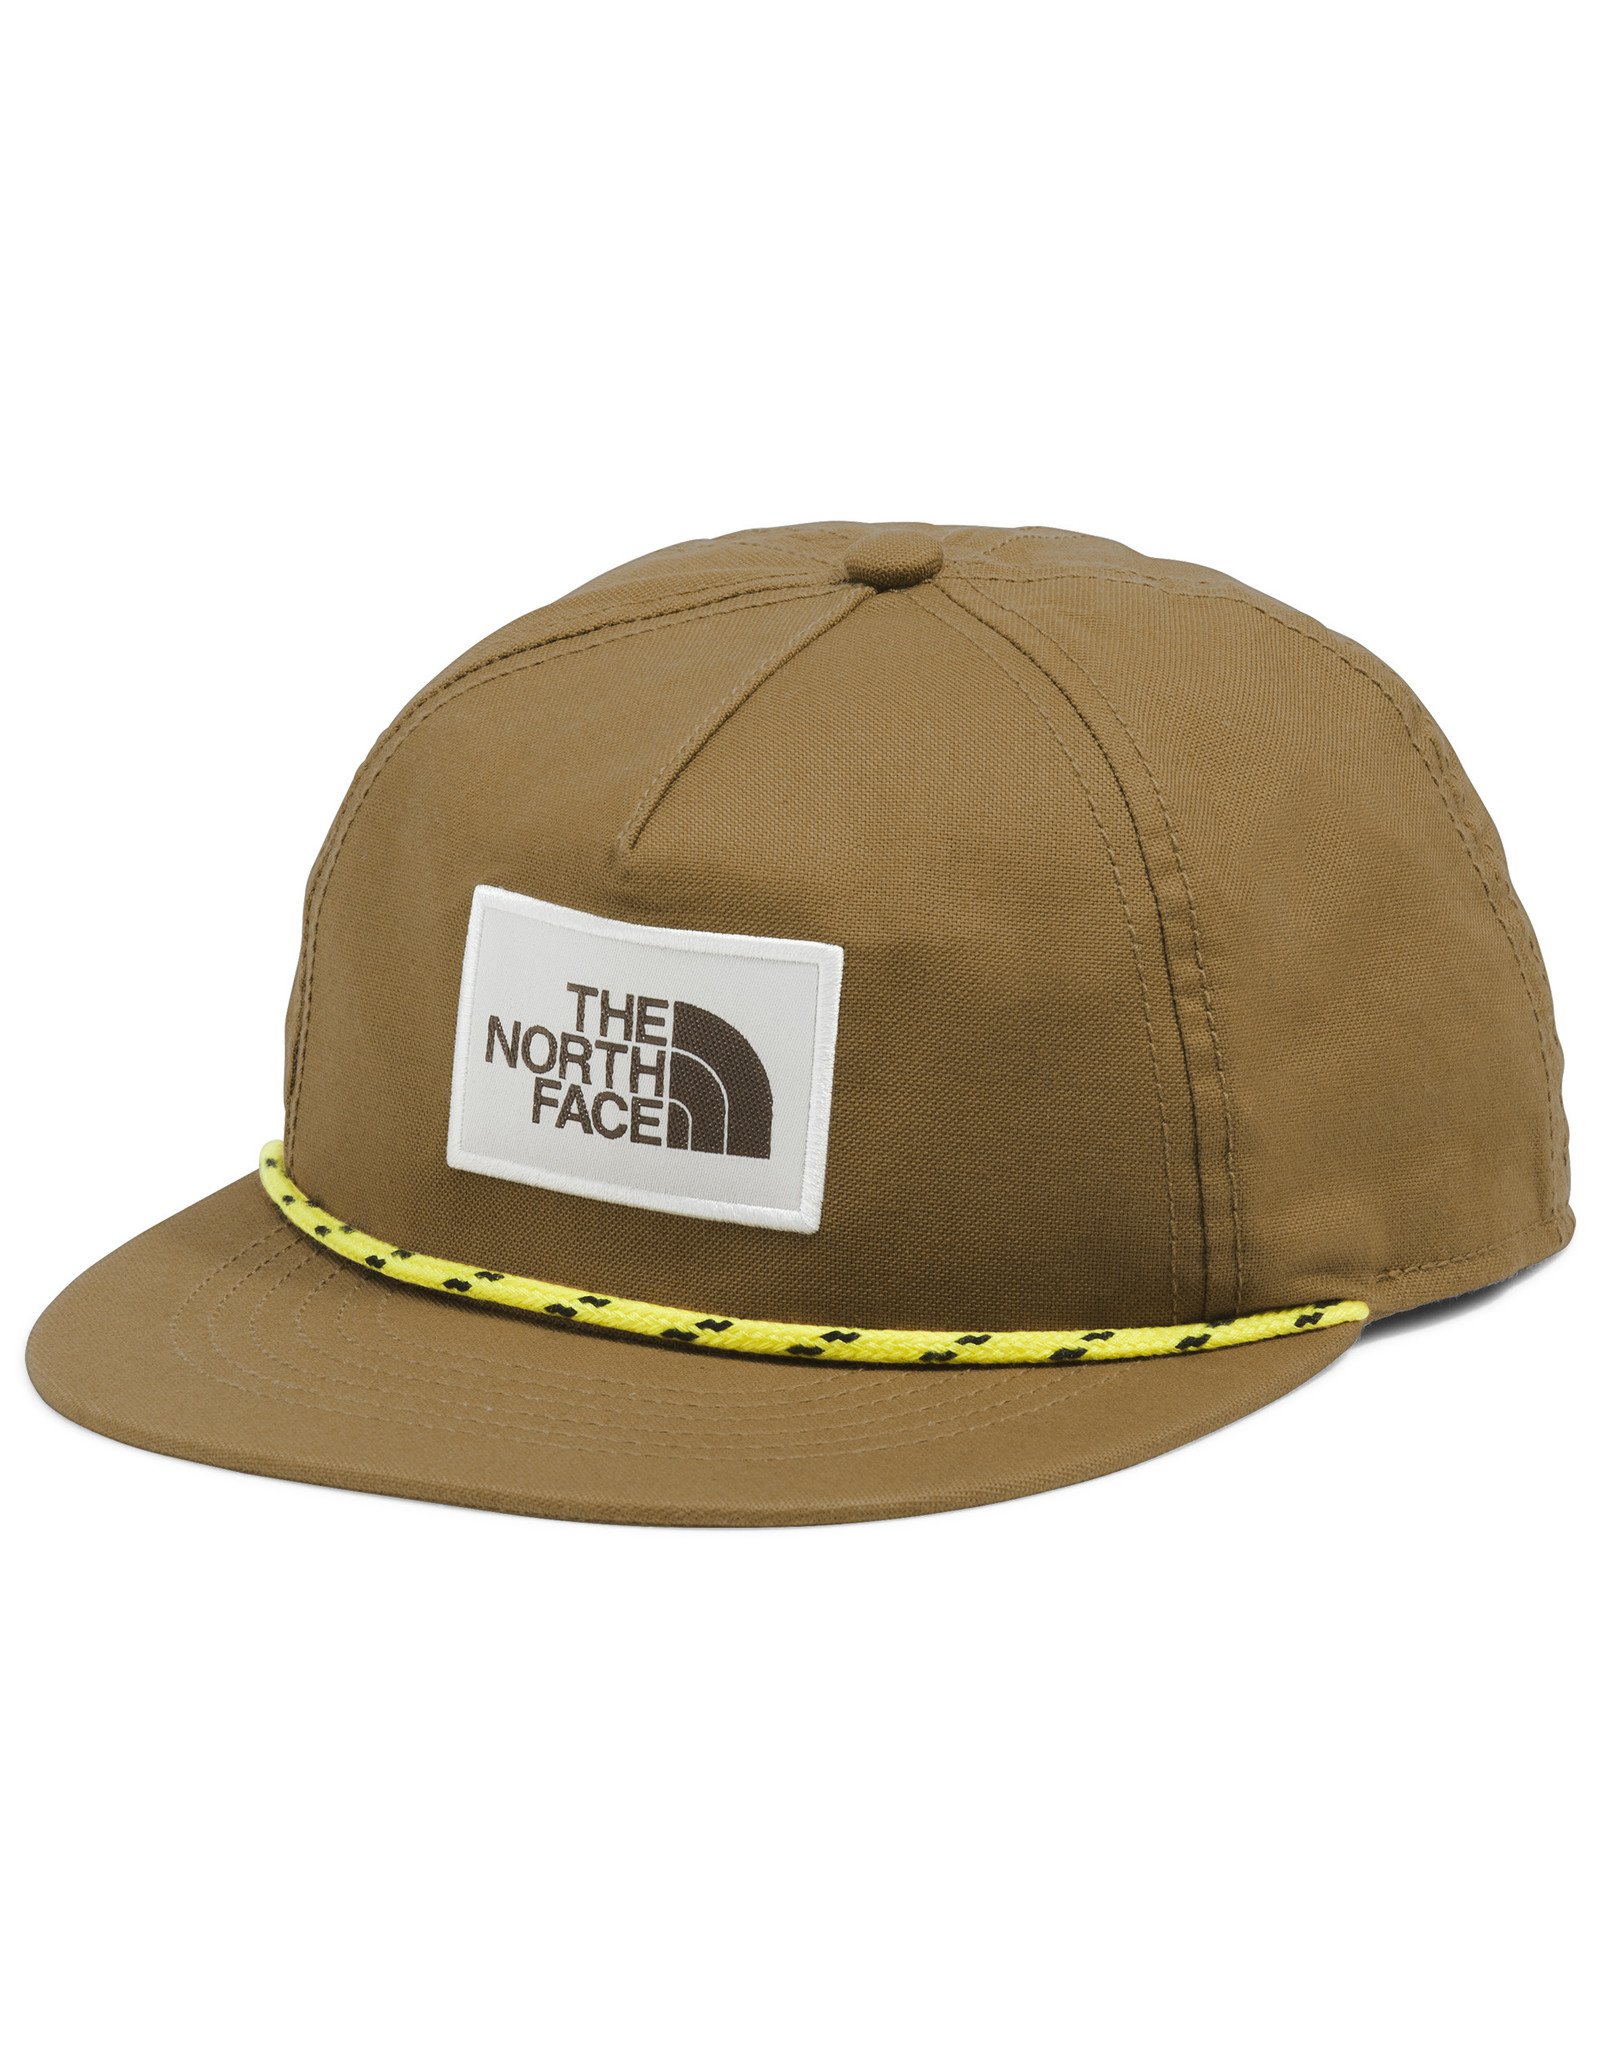 The North Face The North Face Youth Corded Ball Cap - S2020